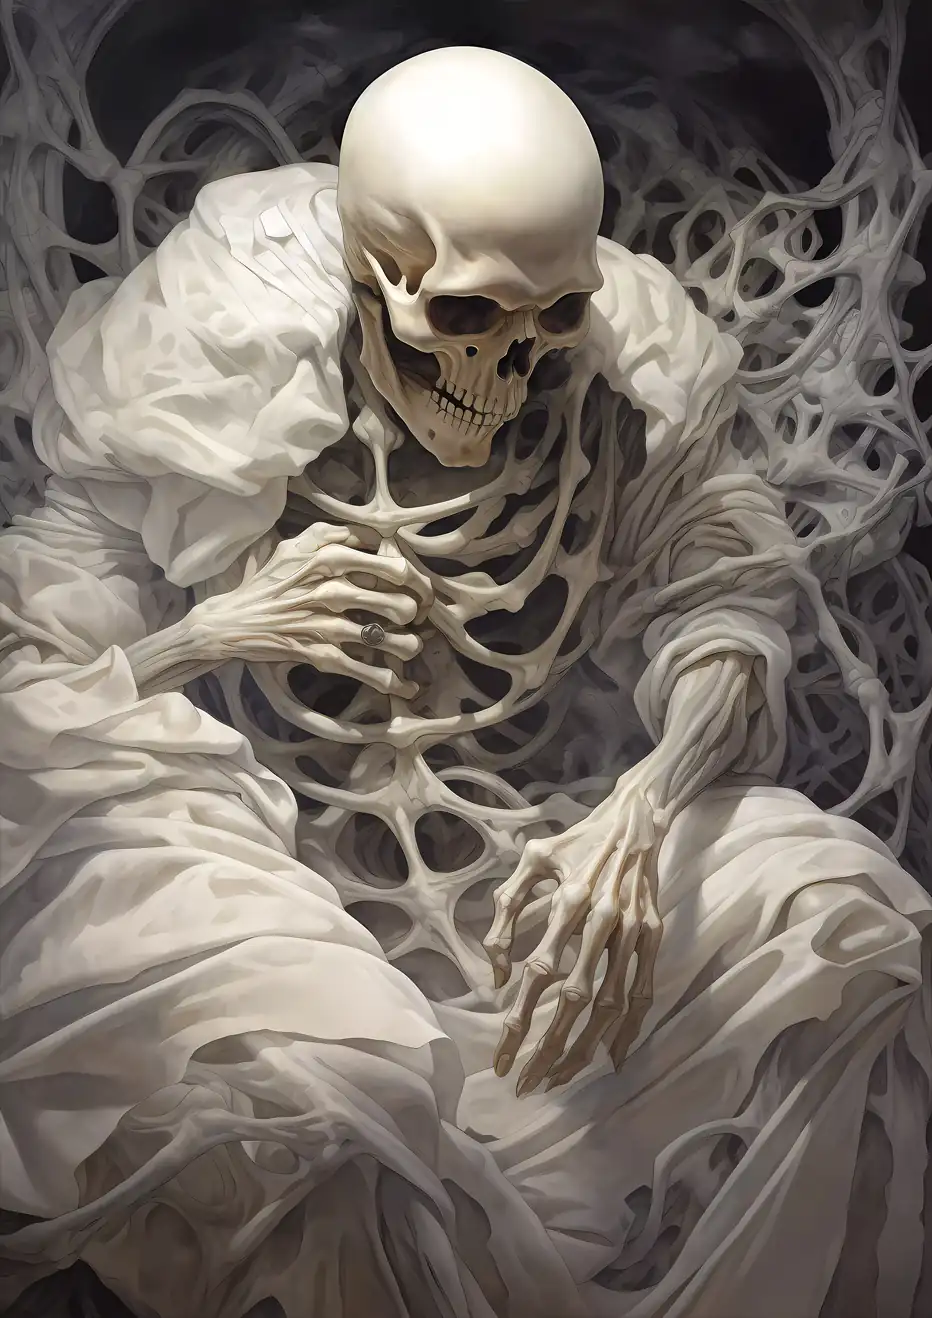 "Echoes of Eternity" - A skeletal figure draped in a white robe stands amidst the dark.